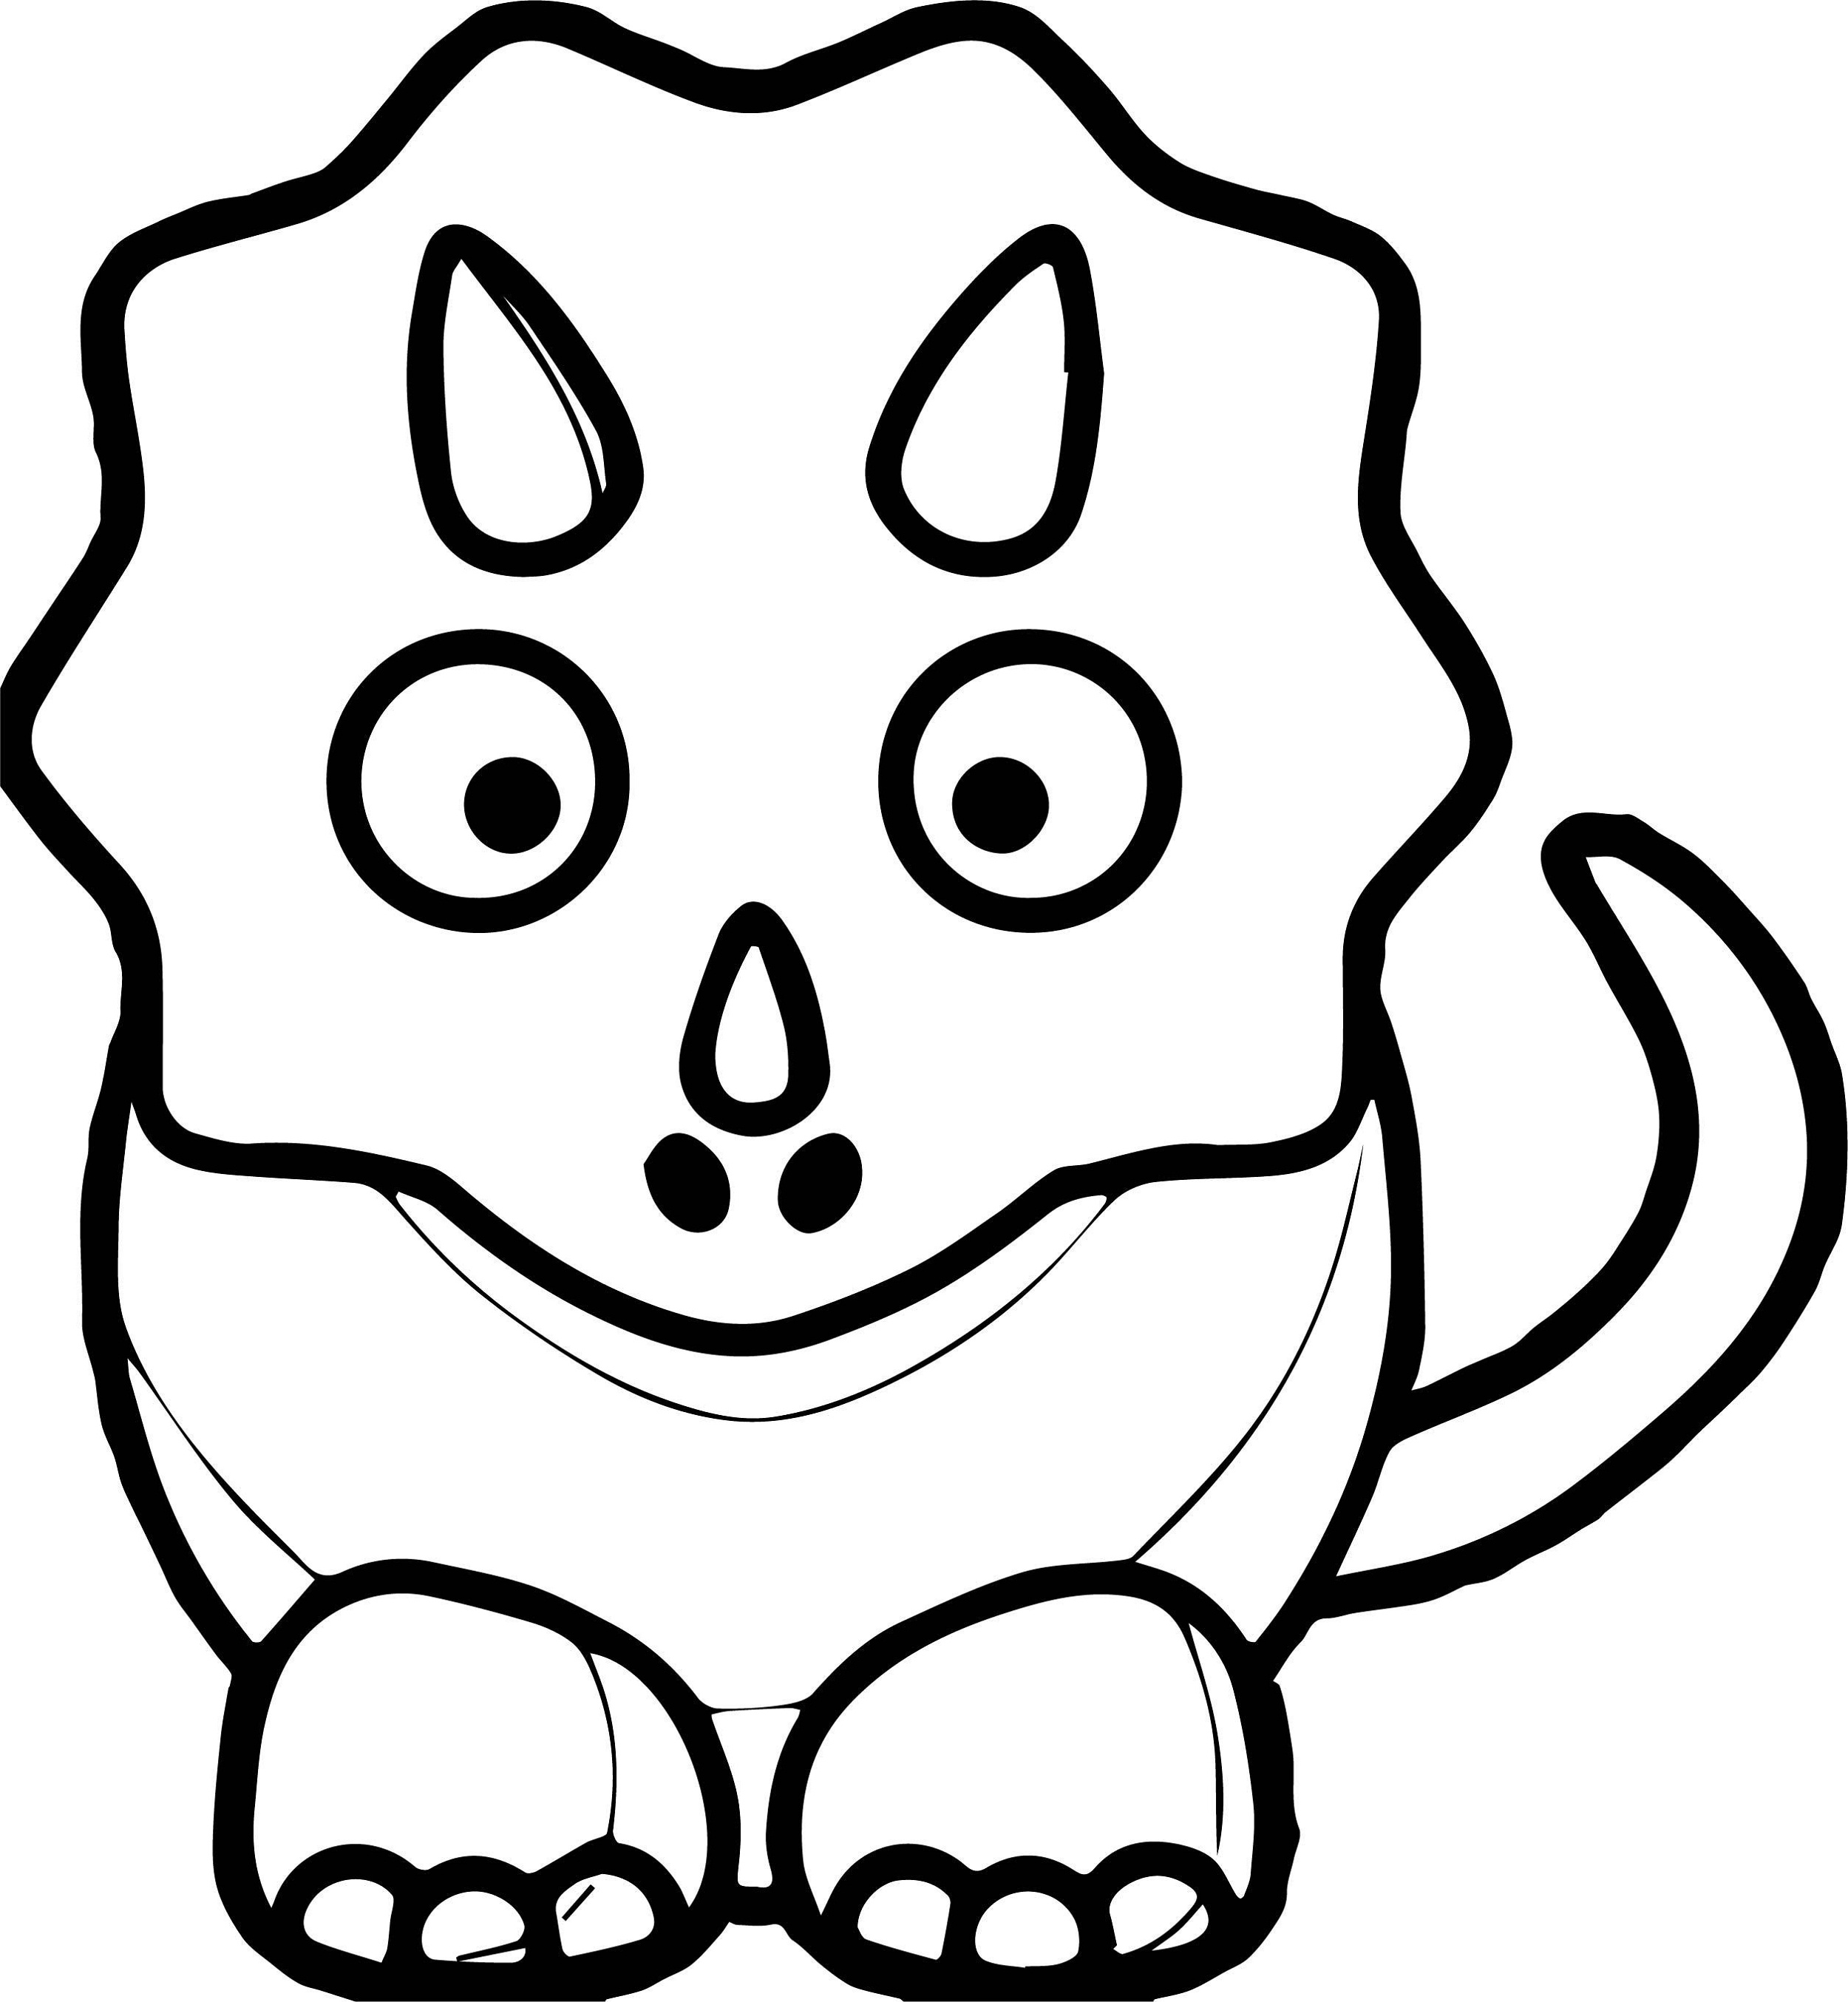 Download Baby Dinosaur Coloring Pages for Preschoolers | Activity ...